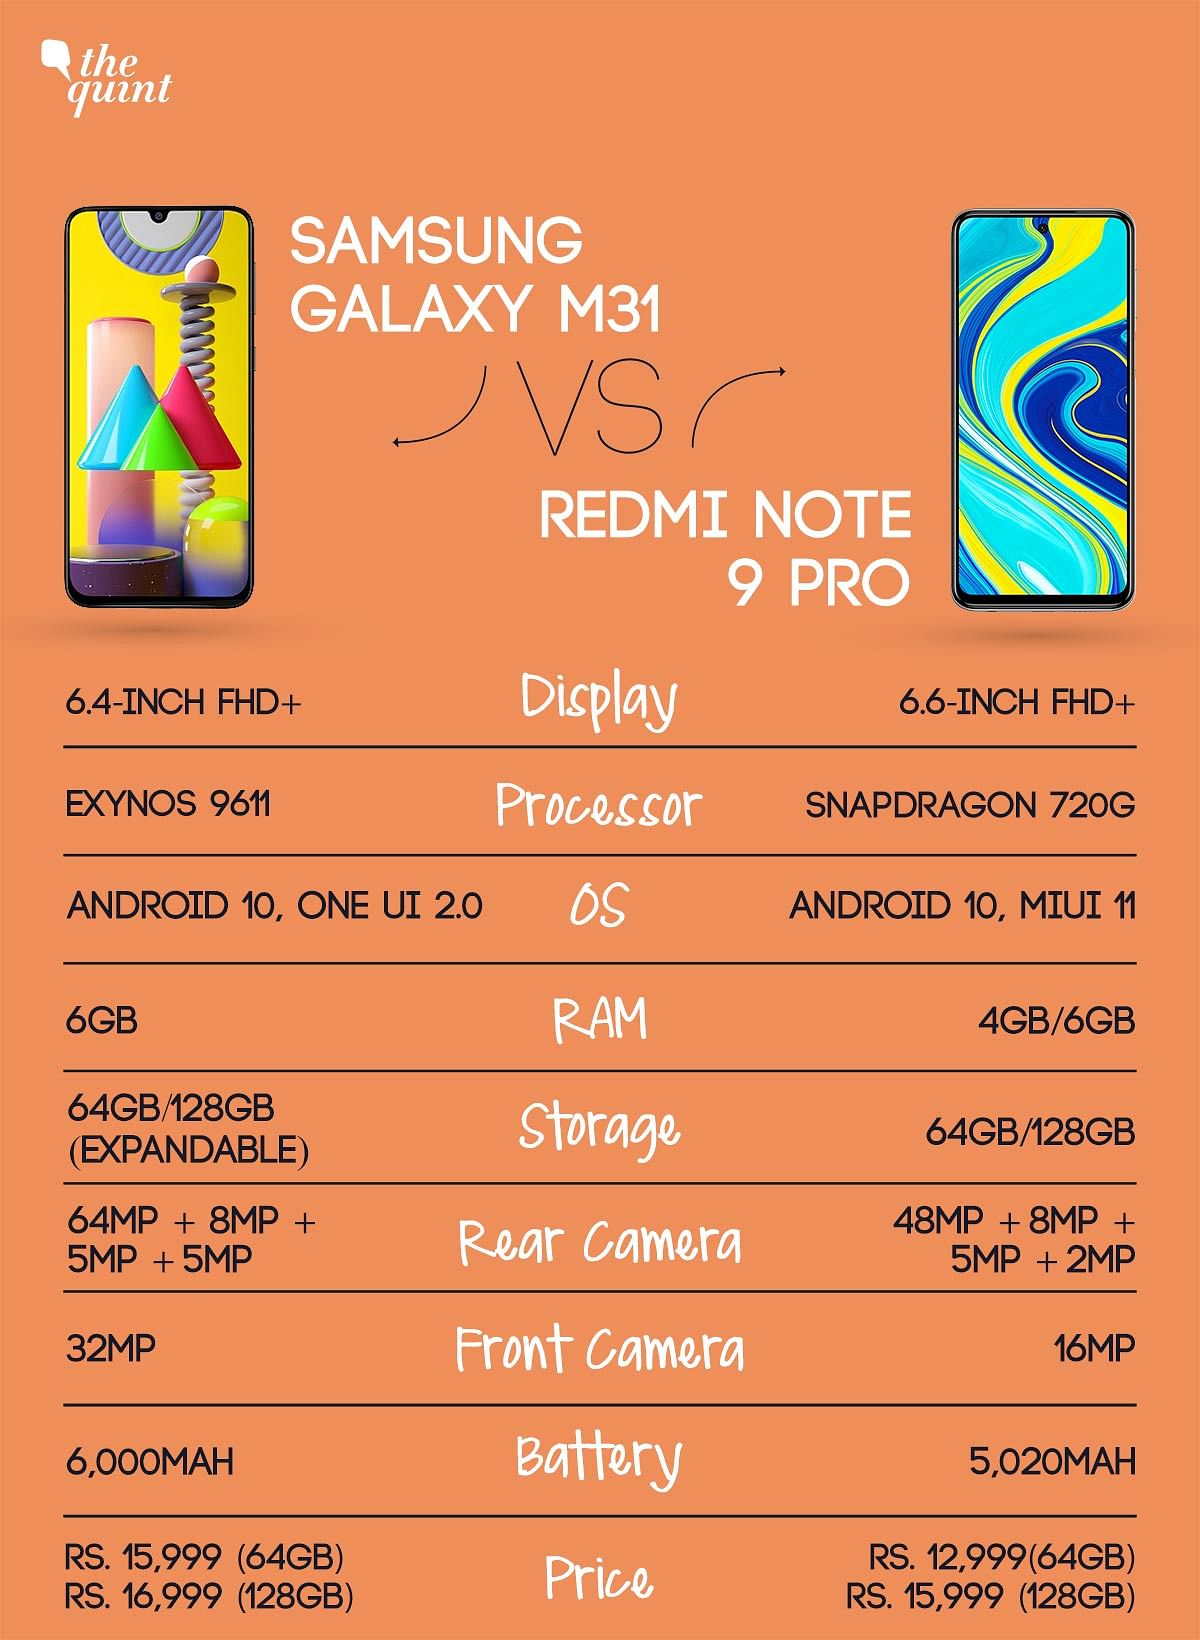 The Redmi Note 9 Pro and the Redmi Note 9 Pro Max have been launched in India starting at Rs 12,999.